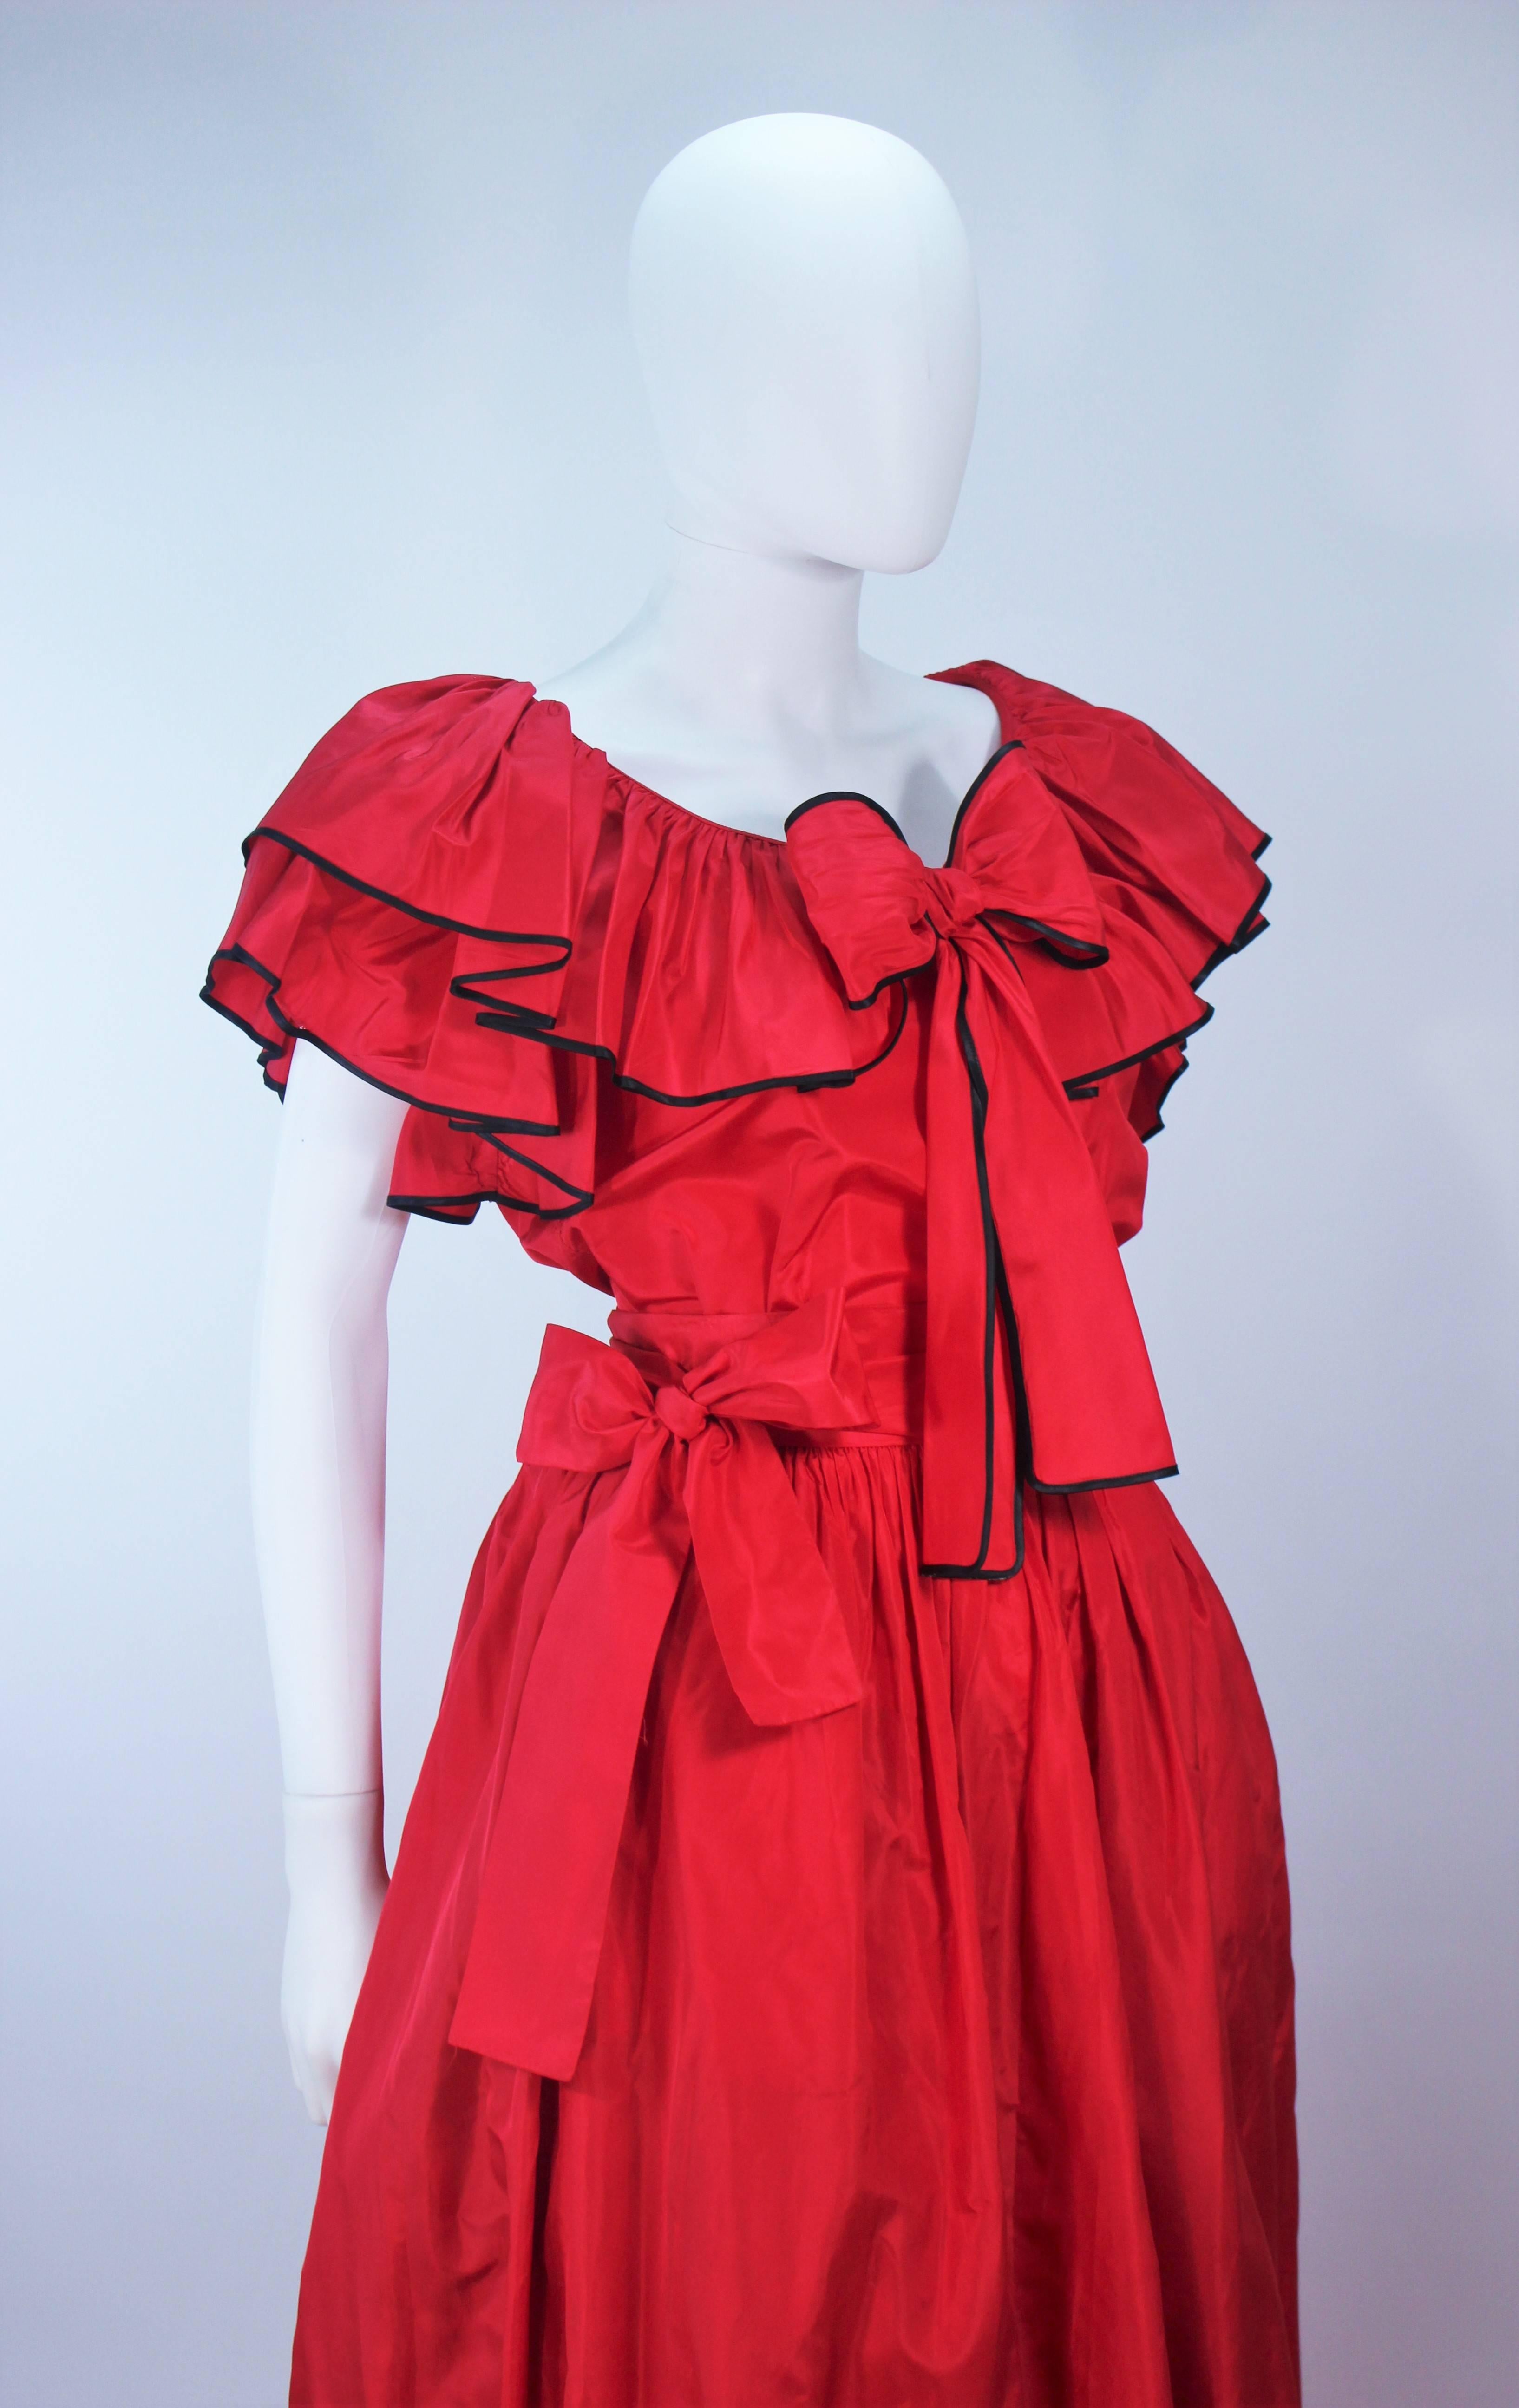 Women's YVES SAINT LAURENT 1970's Red Satin Ruffled Ensemble with Black Trim Size 40 For Sale